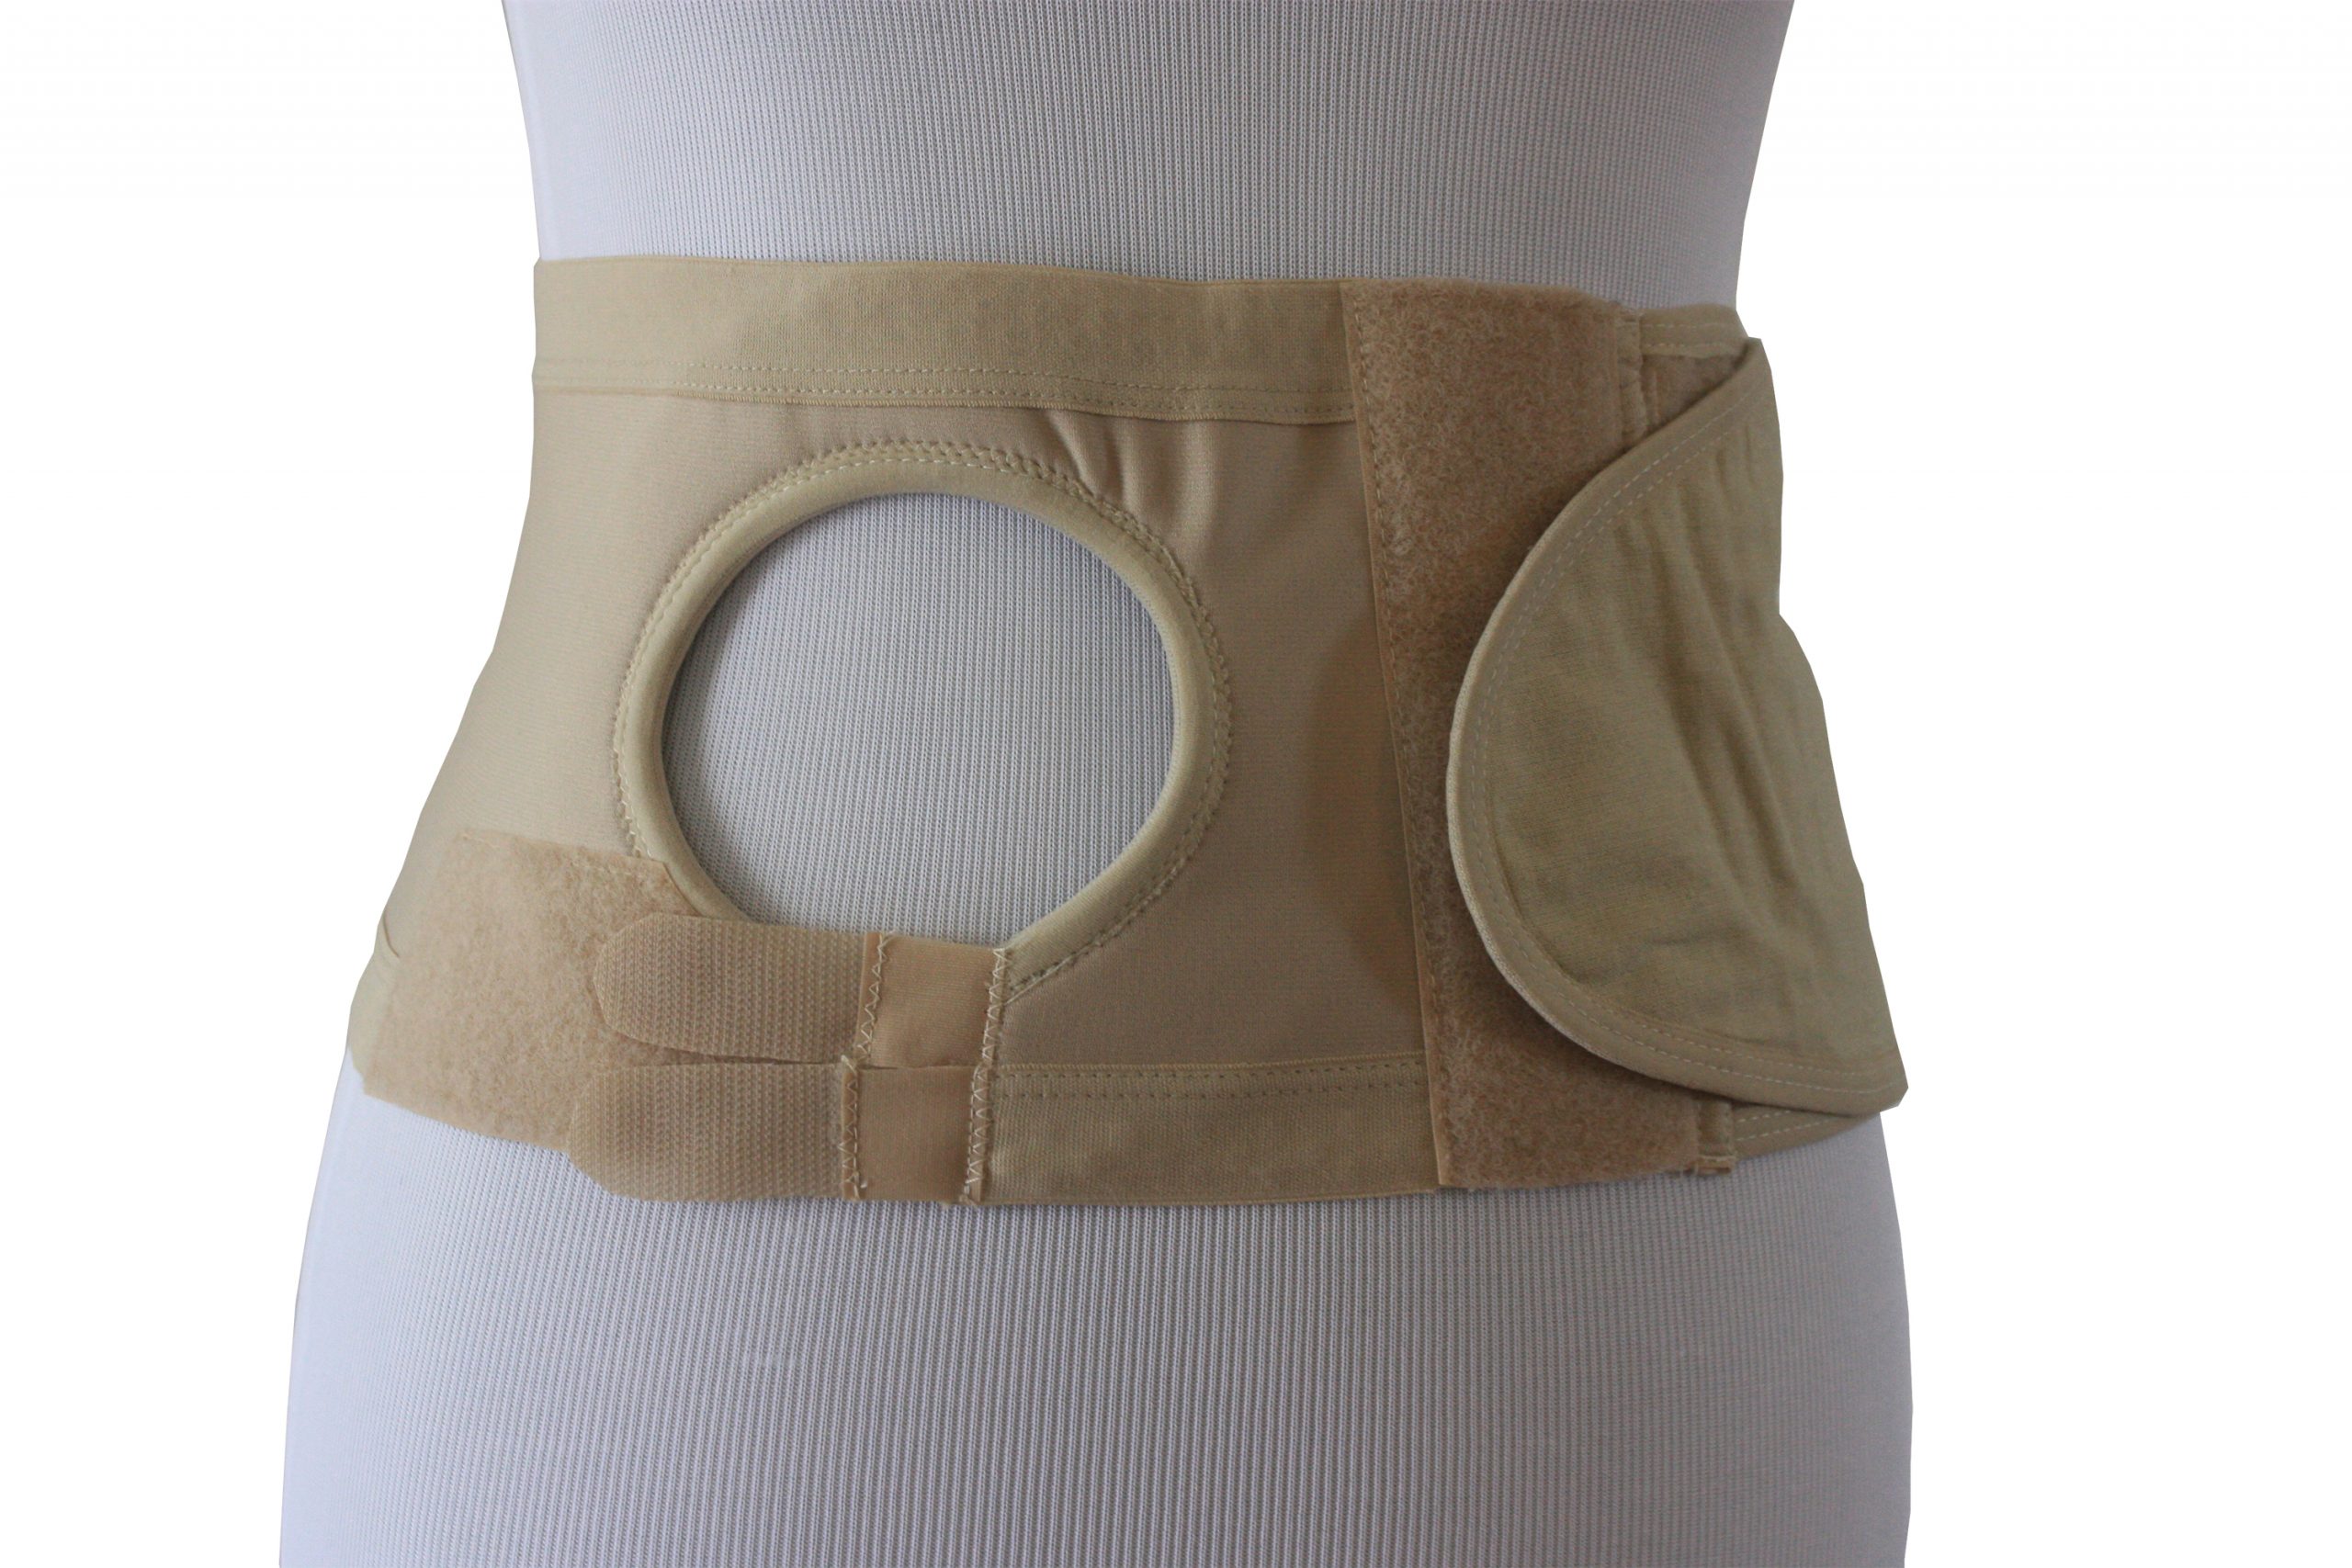 EXCEART 2pcs Stoma Hernia Belts Colostomy Bag Belt Ostomy Belt Support for Colostomy  Ileostomy Urostomy Breathable Fabric Postoperative Band Beige